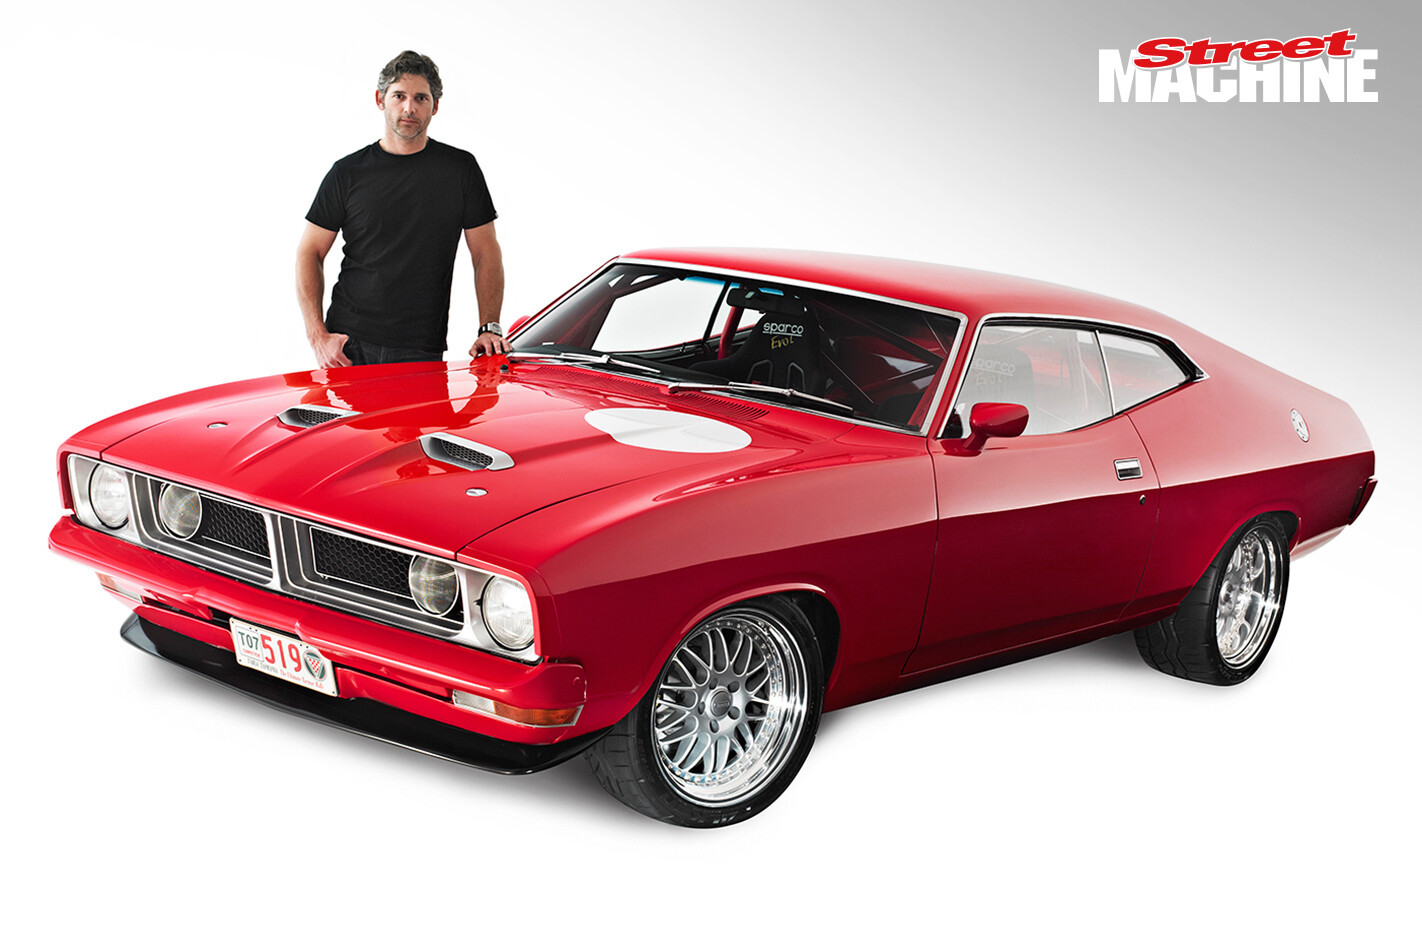 Eric Bana Ford XB Coupe Love The Beast